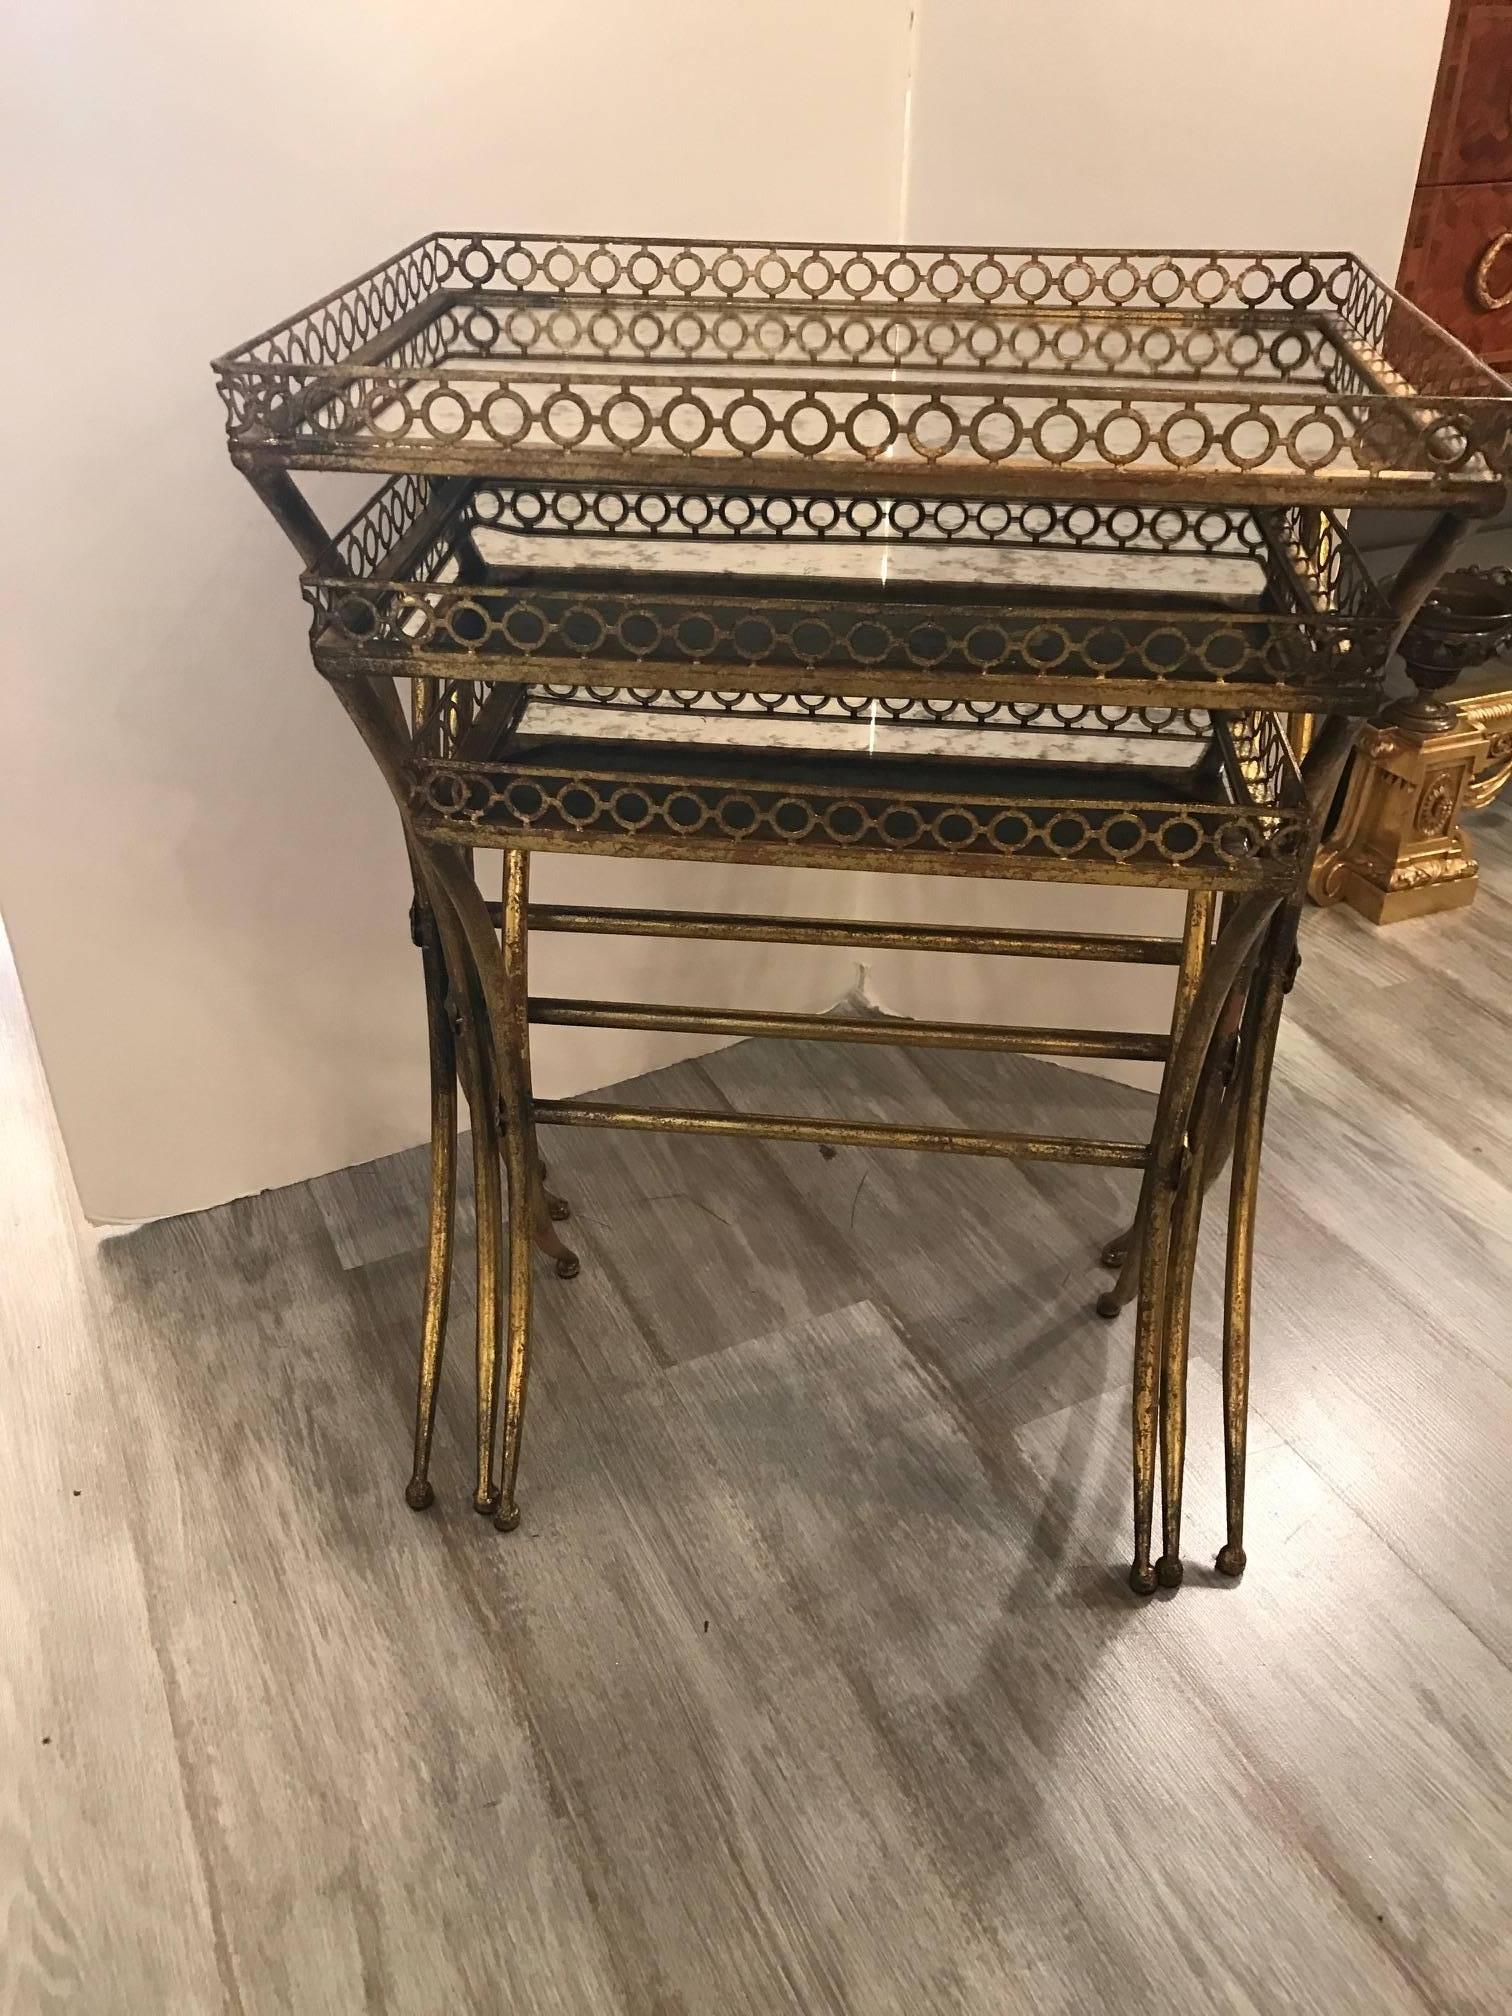 Diminutive set of Italian gilt metal and mirror nesting tables. Each one fits neatly into the other and can be displayed very compact of stepped out showing each one separately.